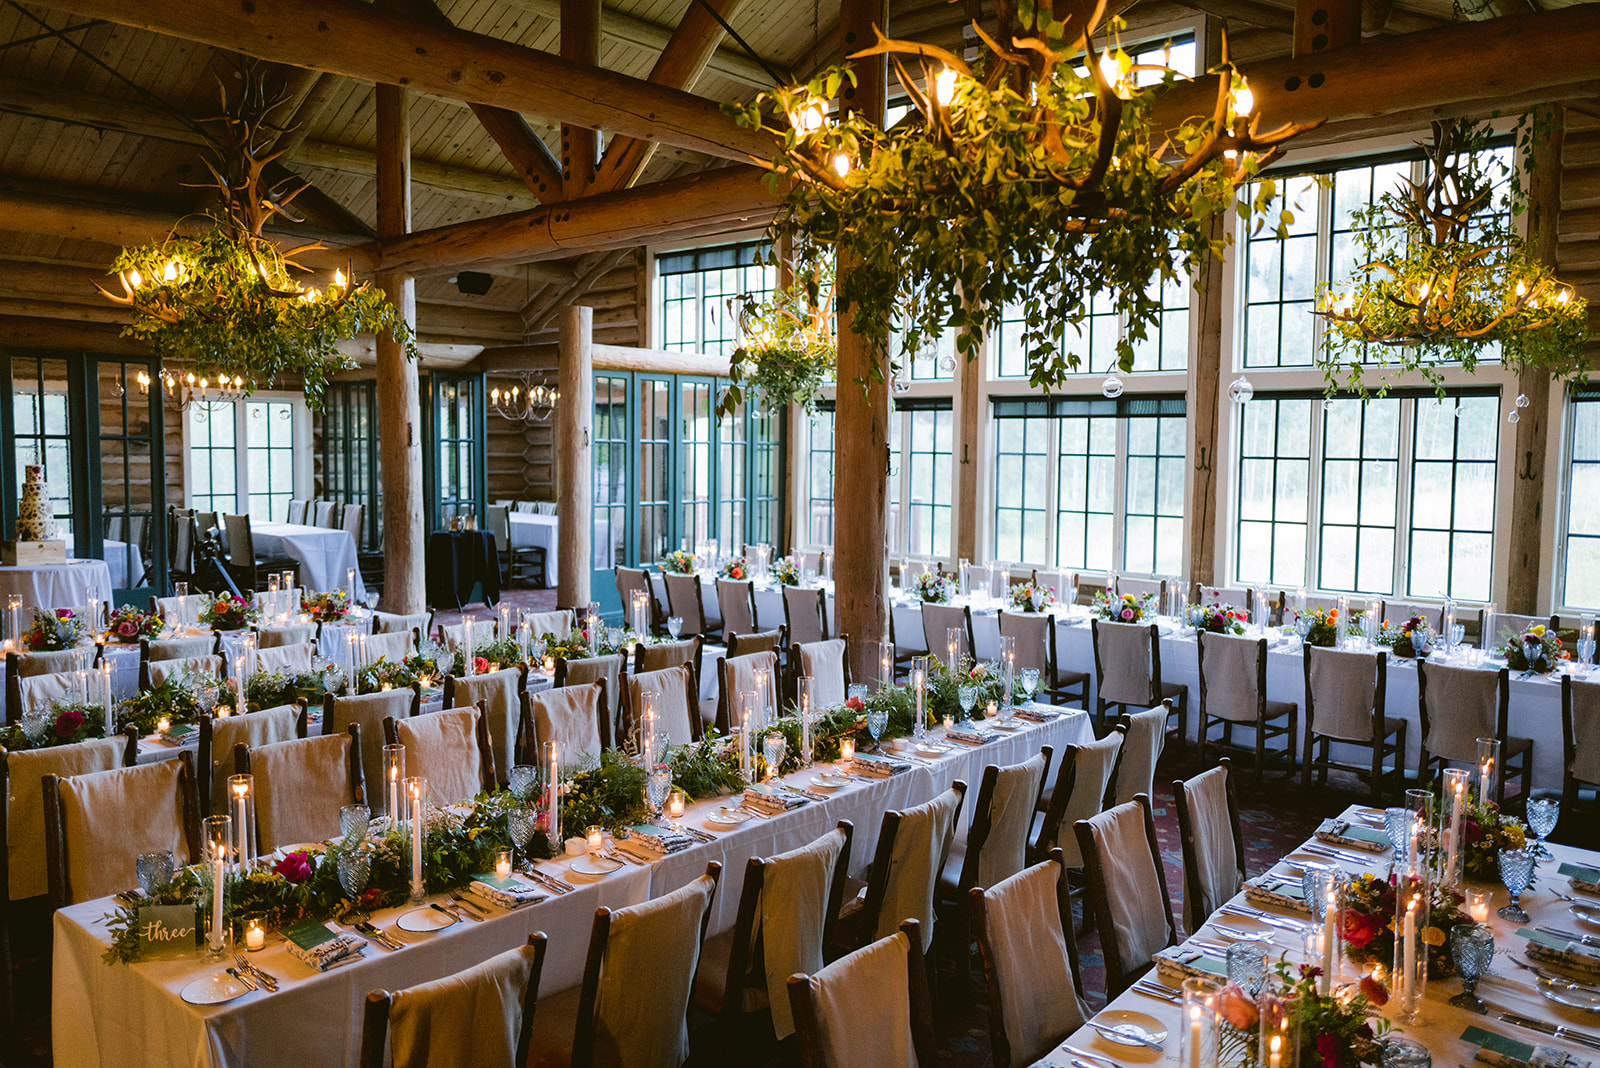 Beano's Cabin wedding reception design by Aspen and Ivy